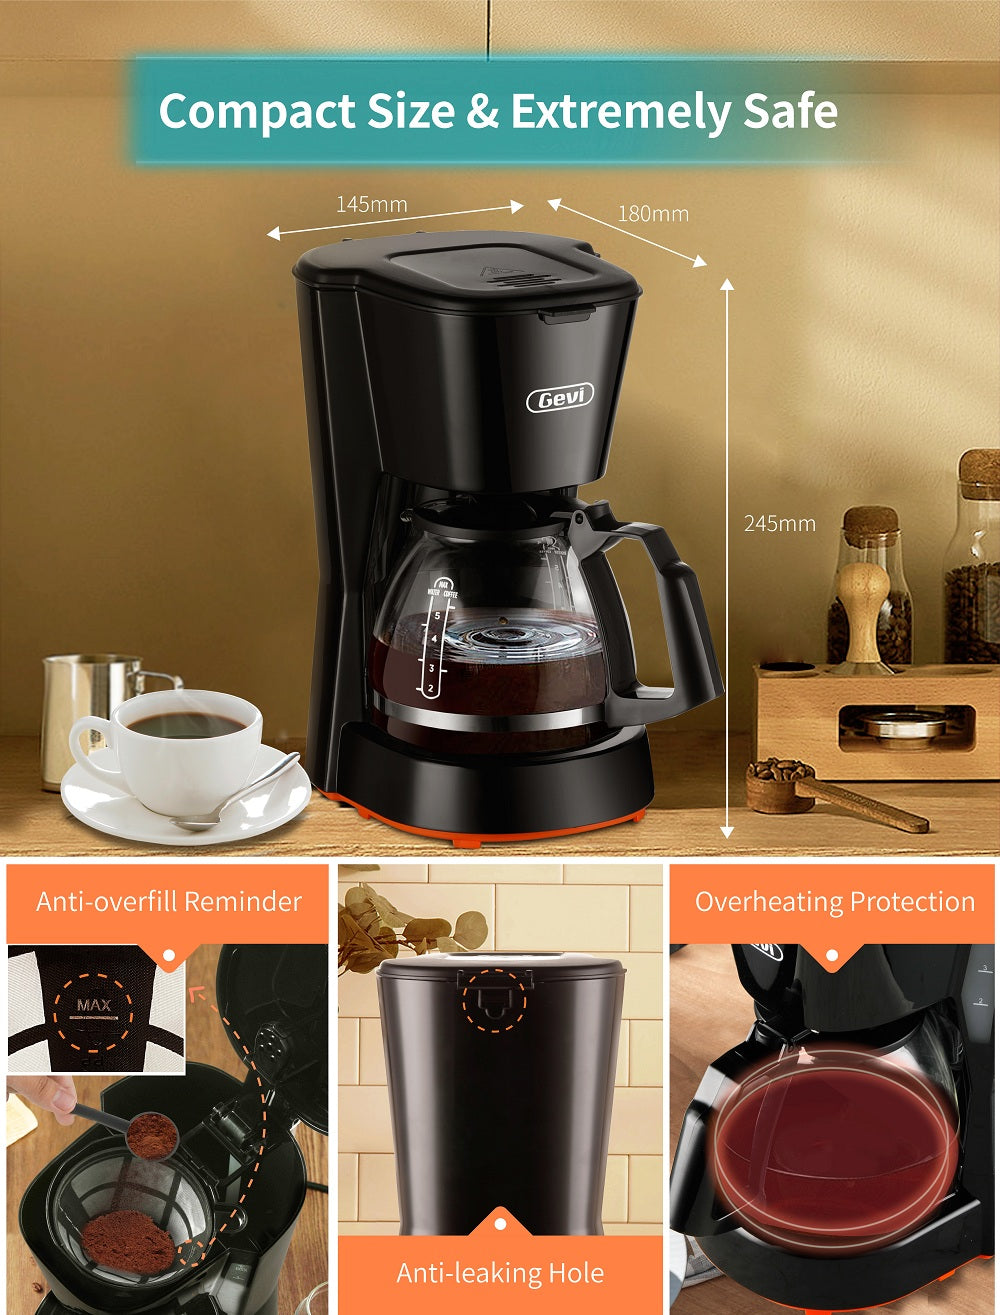 Gevi 4-Cup Coffee Maker with Auto-Shut Off, Small Drip Coffeemaker